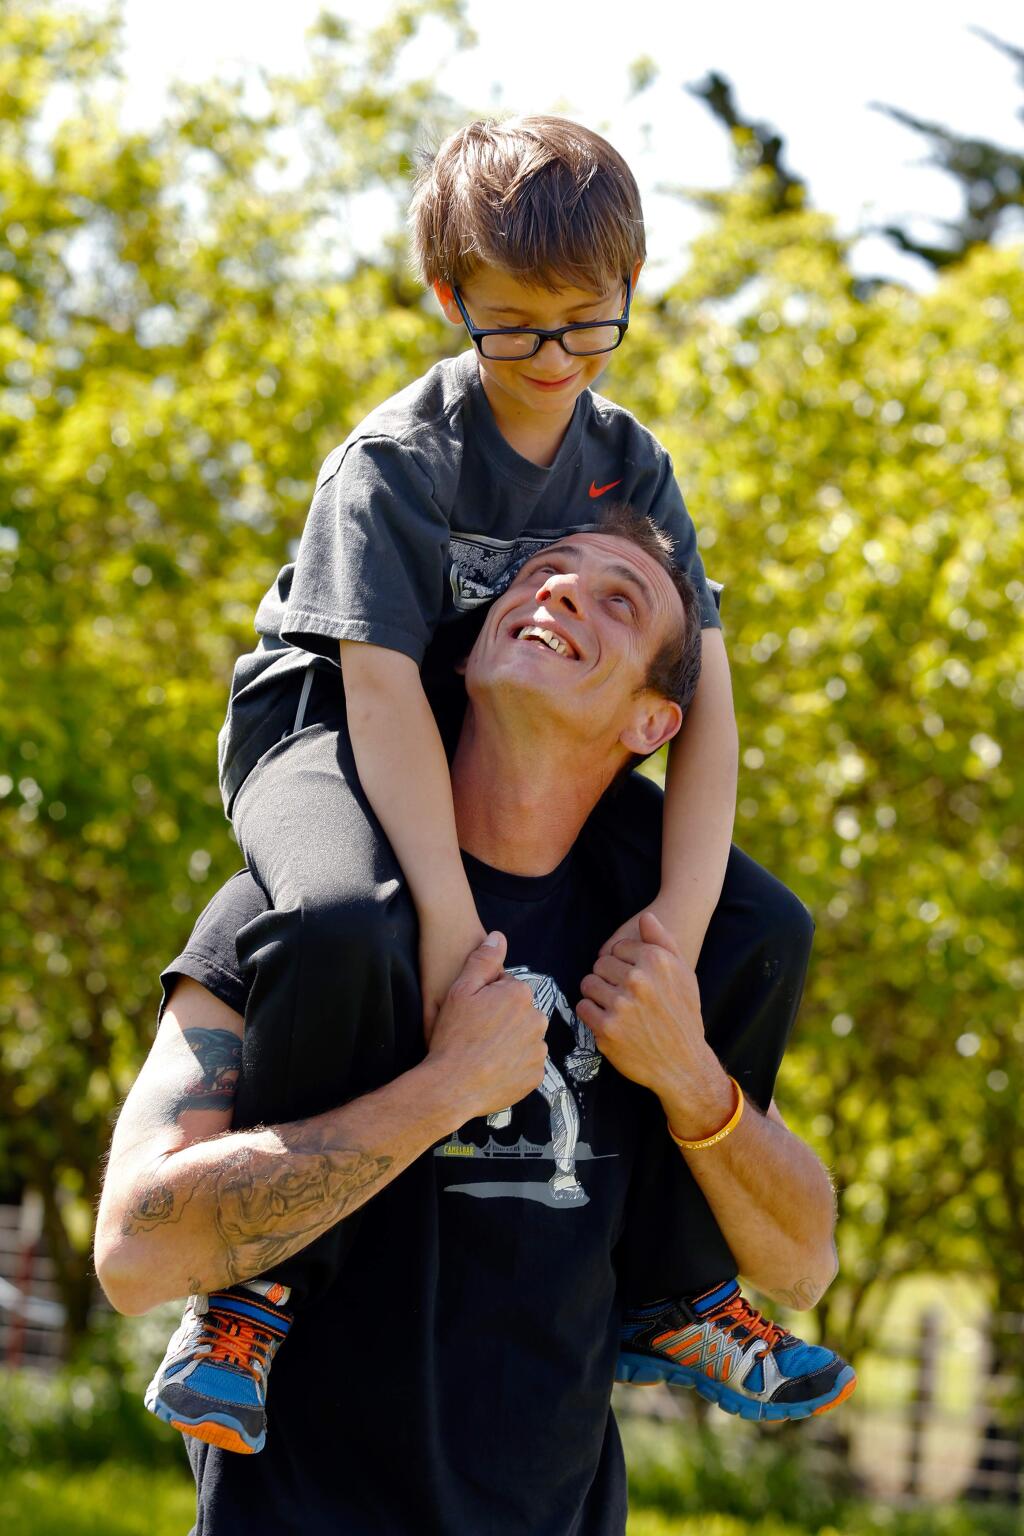 Eddie Zentner carries his son Jayden, 7, at their family farm in Petaluma, California on Saturday, April 23, 2016. Zenter is raising funds and awareness for the Leukemia and Lymphoma Society to honor Jayden who was diagnosed with leukemia at age 4 but is currently in remission. (Alvin Jornada / The Press Democrat)